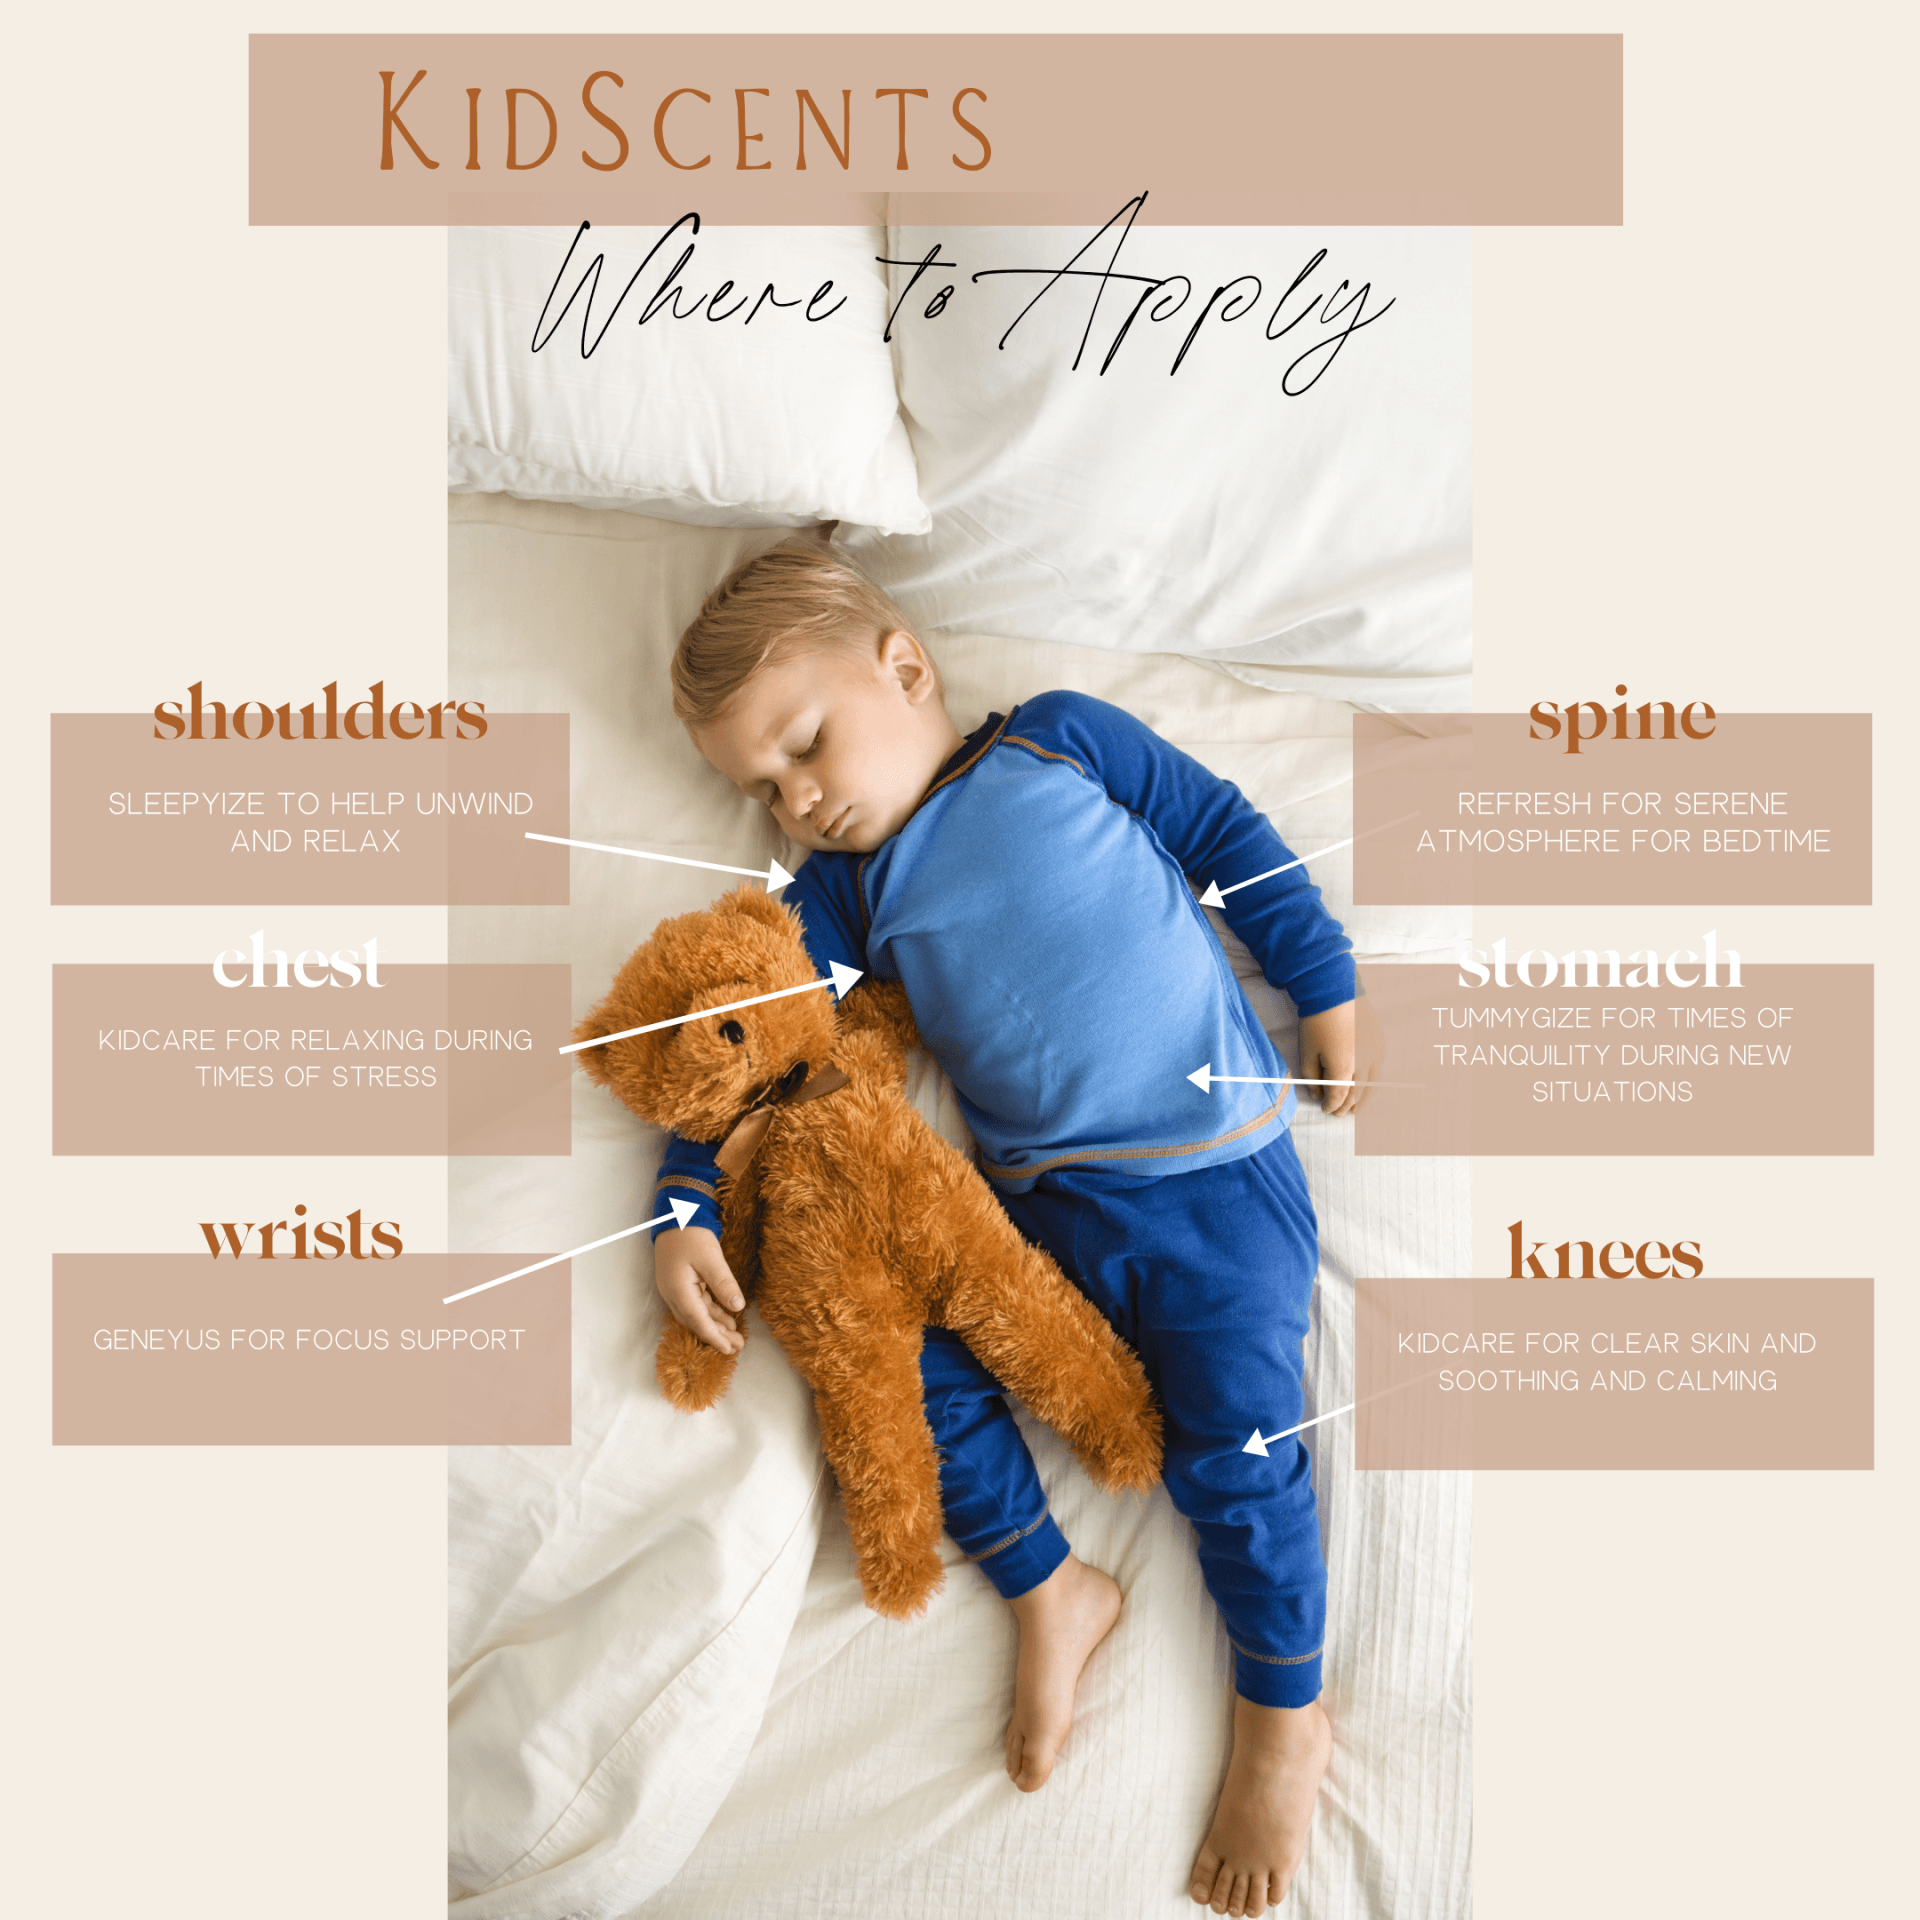 Where to apply Essential Oils on Kids